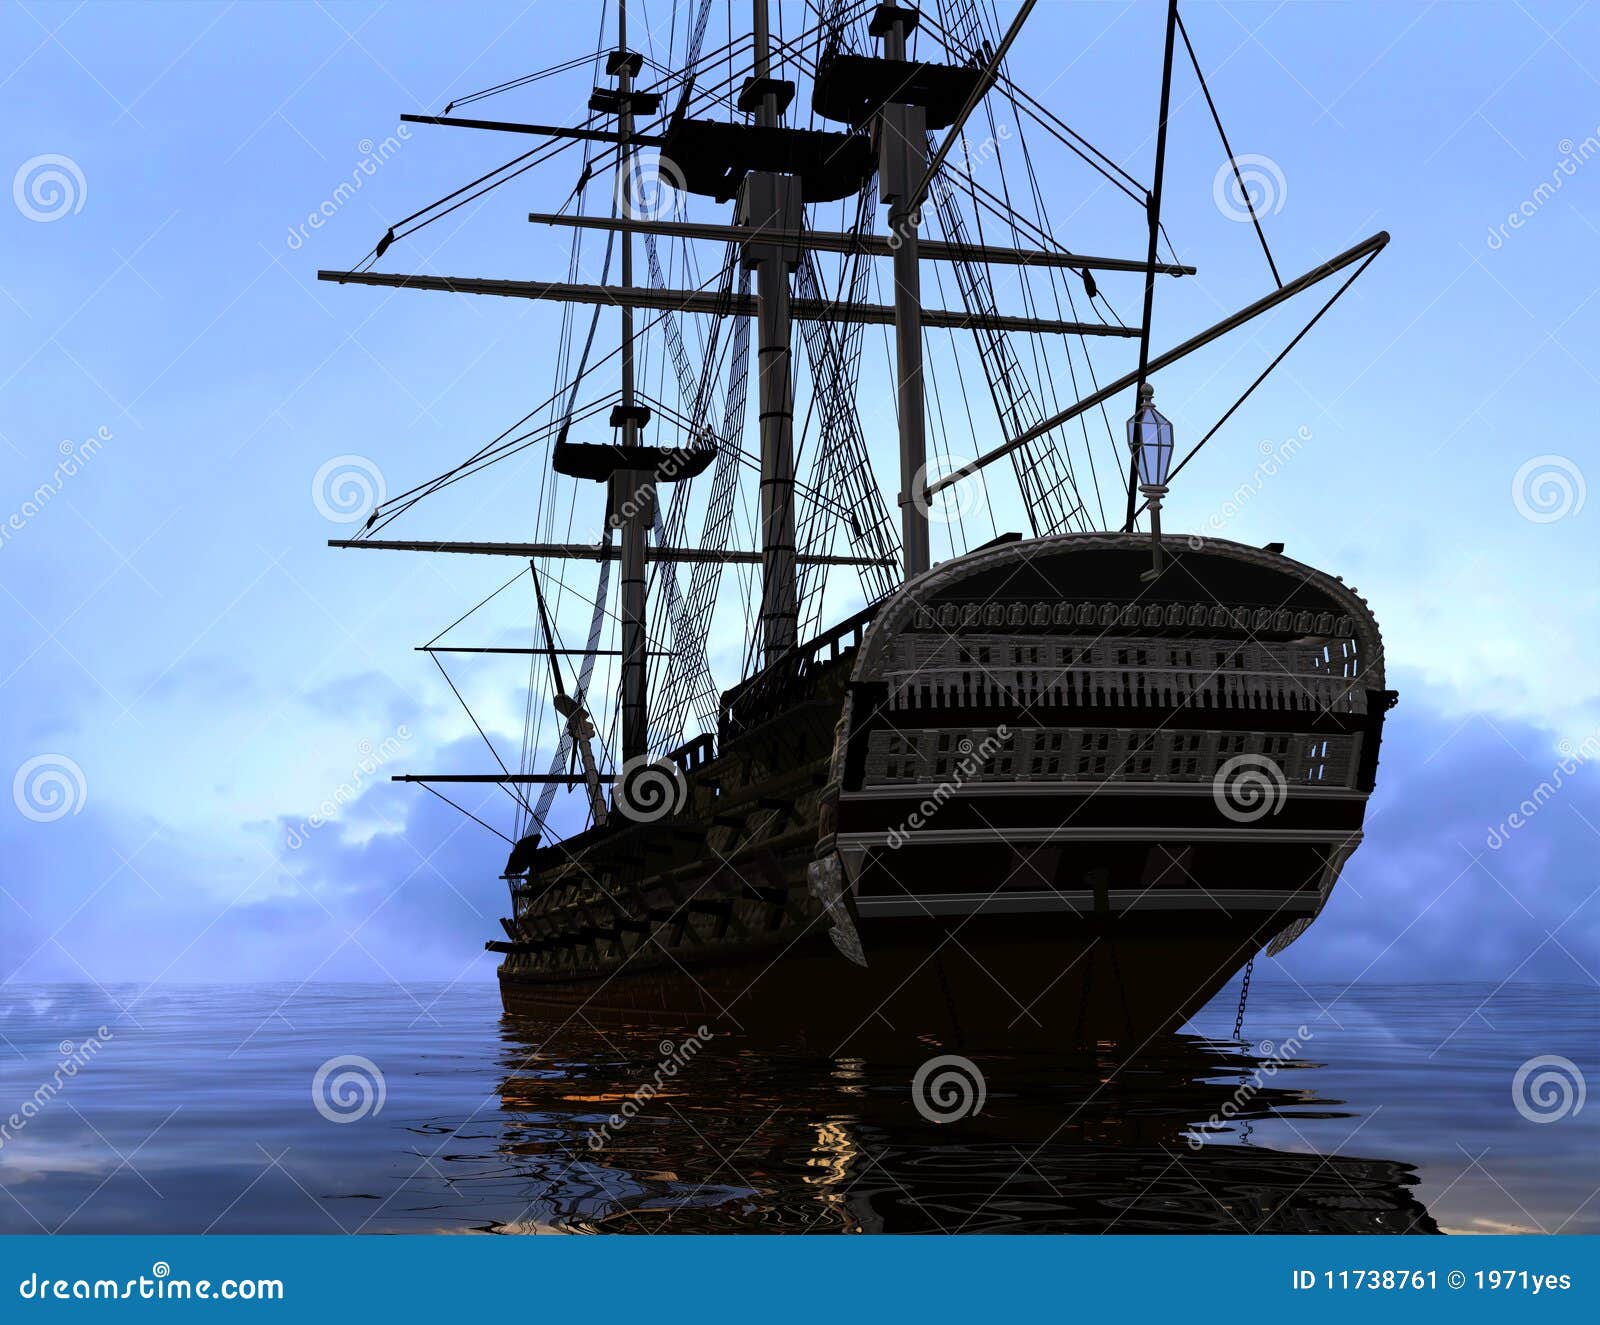 The ancient ship stock illustration. Image of voyage 